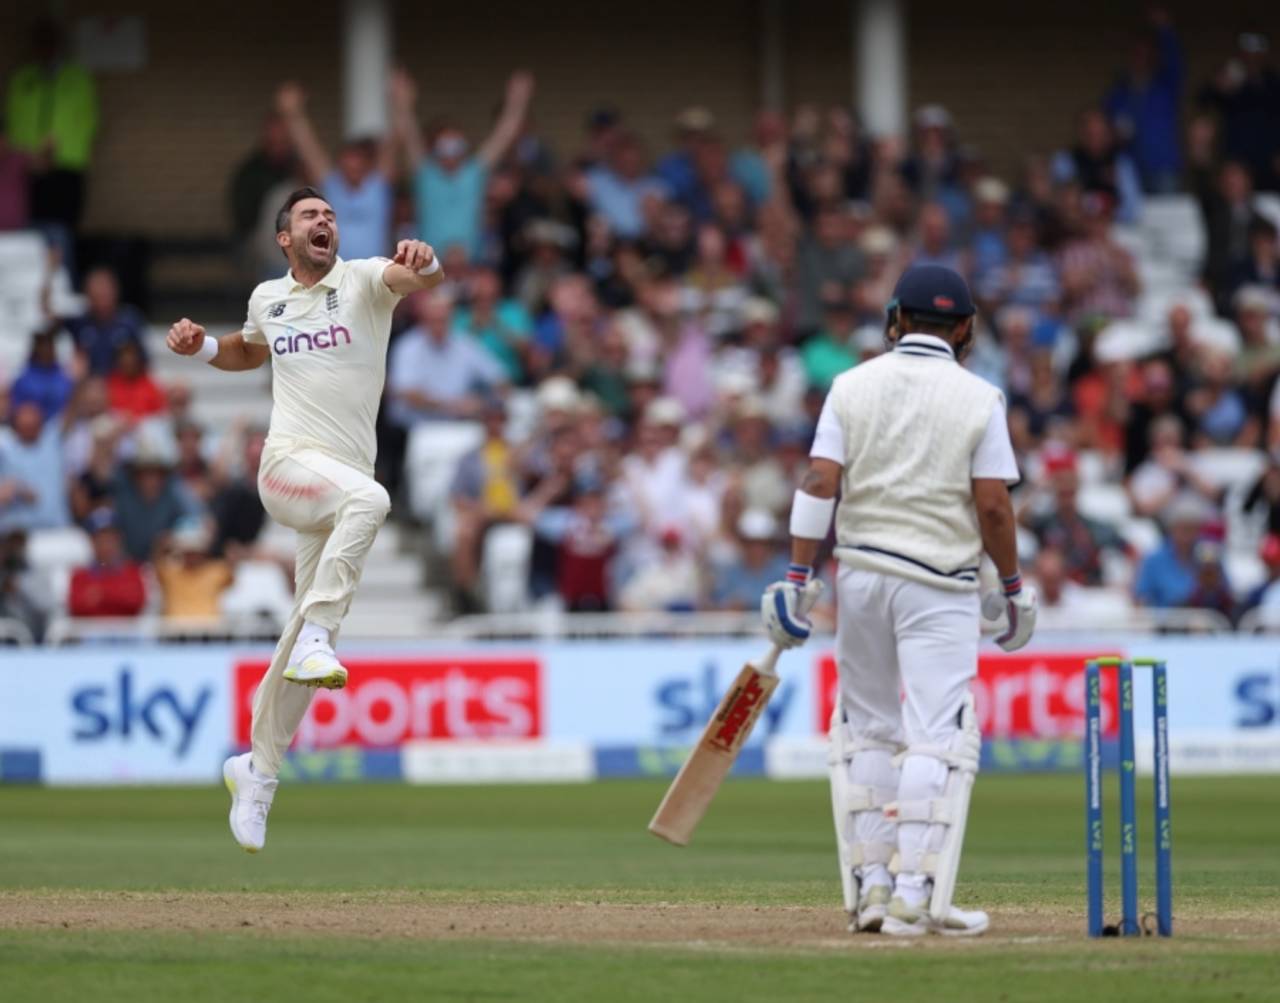 James Anderson had Virat Kohli edging behind first ball, England vs India, 1st Test, Nottingham, 2nd day, August 5, 2021